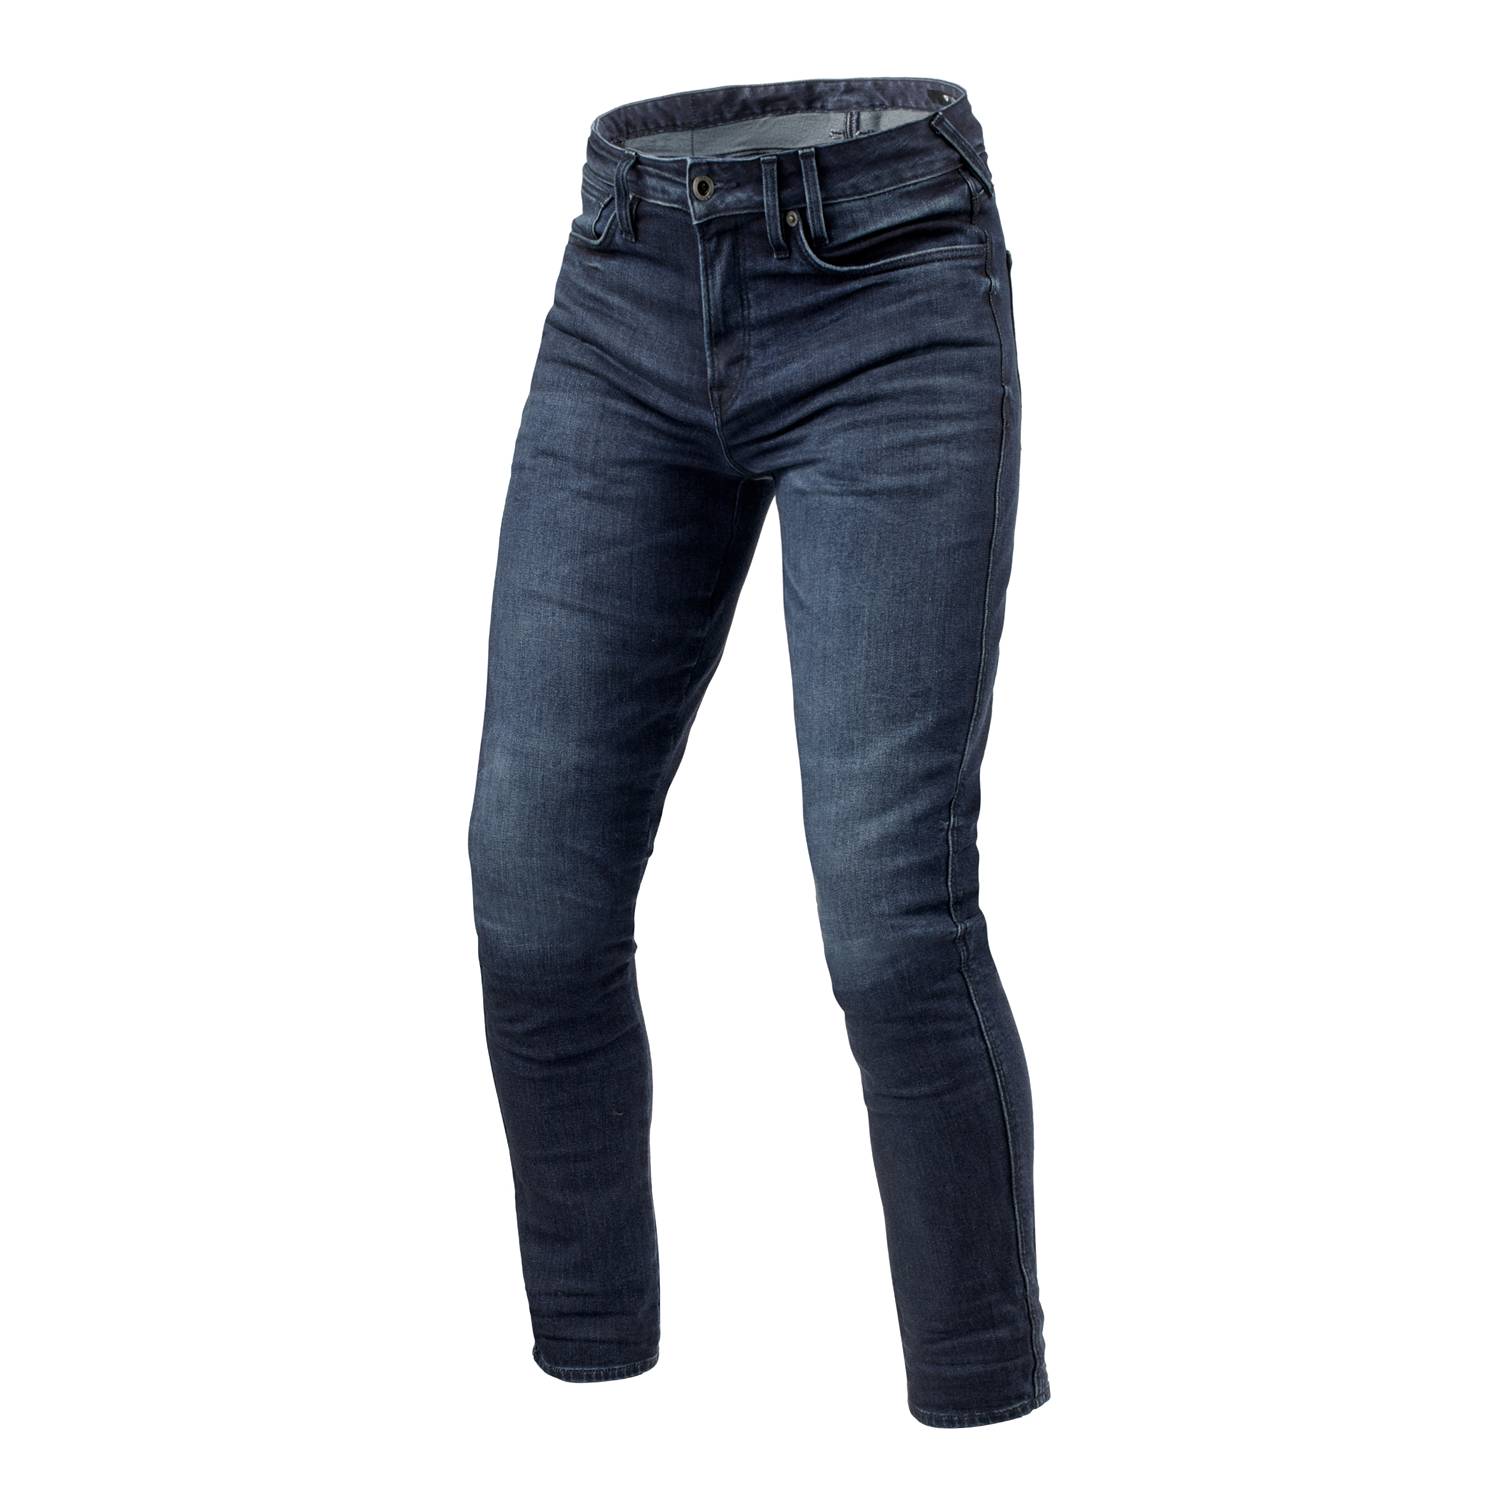 Image of EU REV'IT! Jeans Carlin SK Dark Blue Used L34 Motorcycle Jeans Taille L34/W34